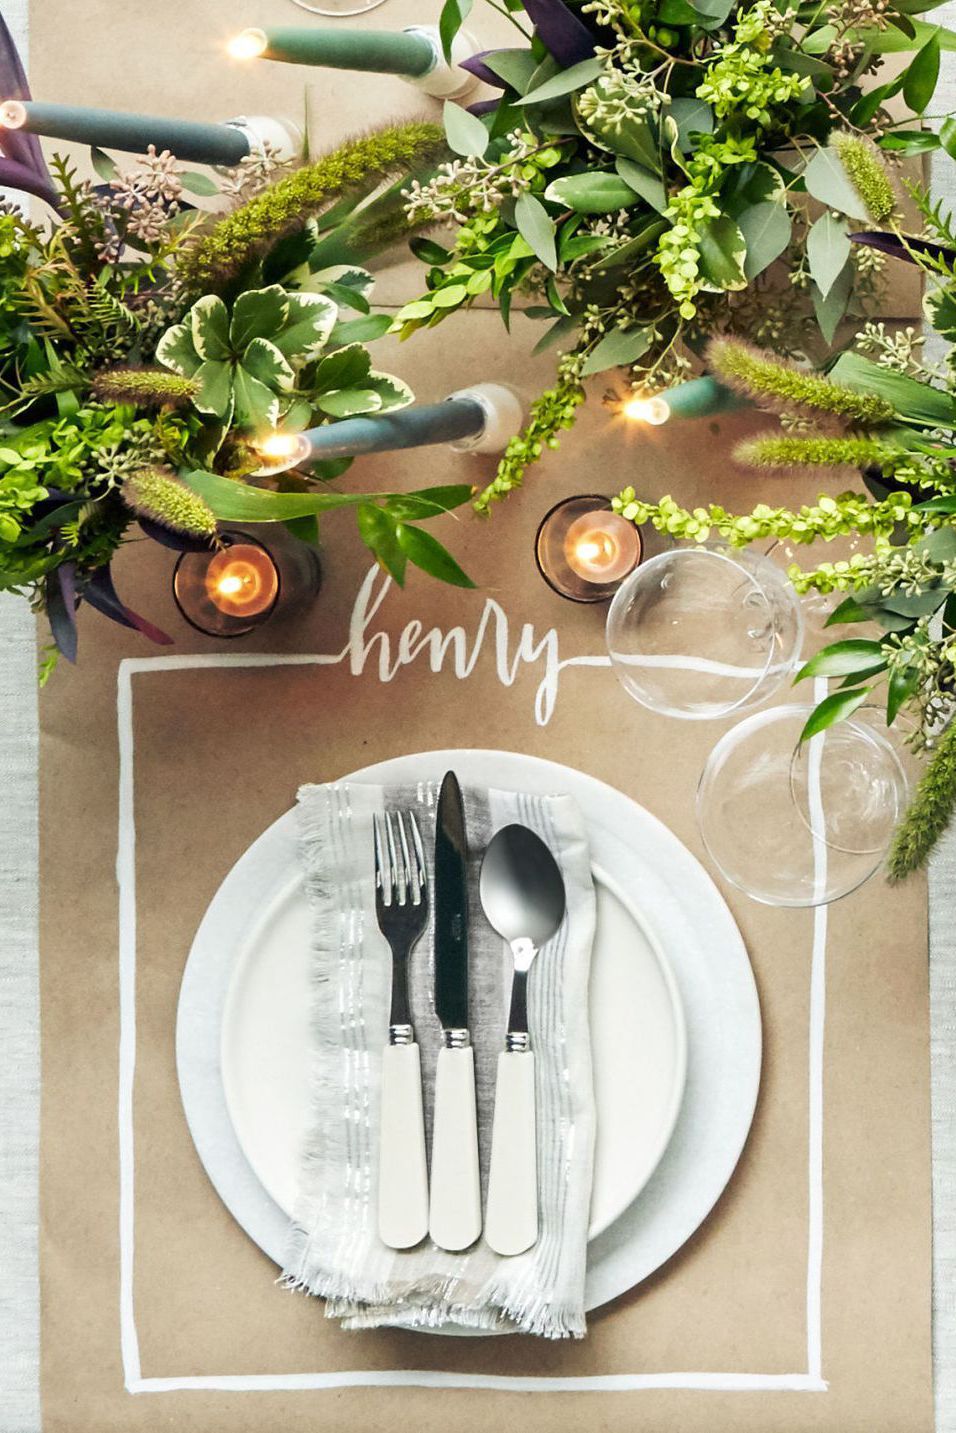 21 DIY Thanksgiving Place Cards - Easy Name Card Ideas for Thanksgiving